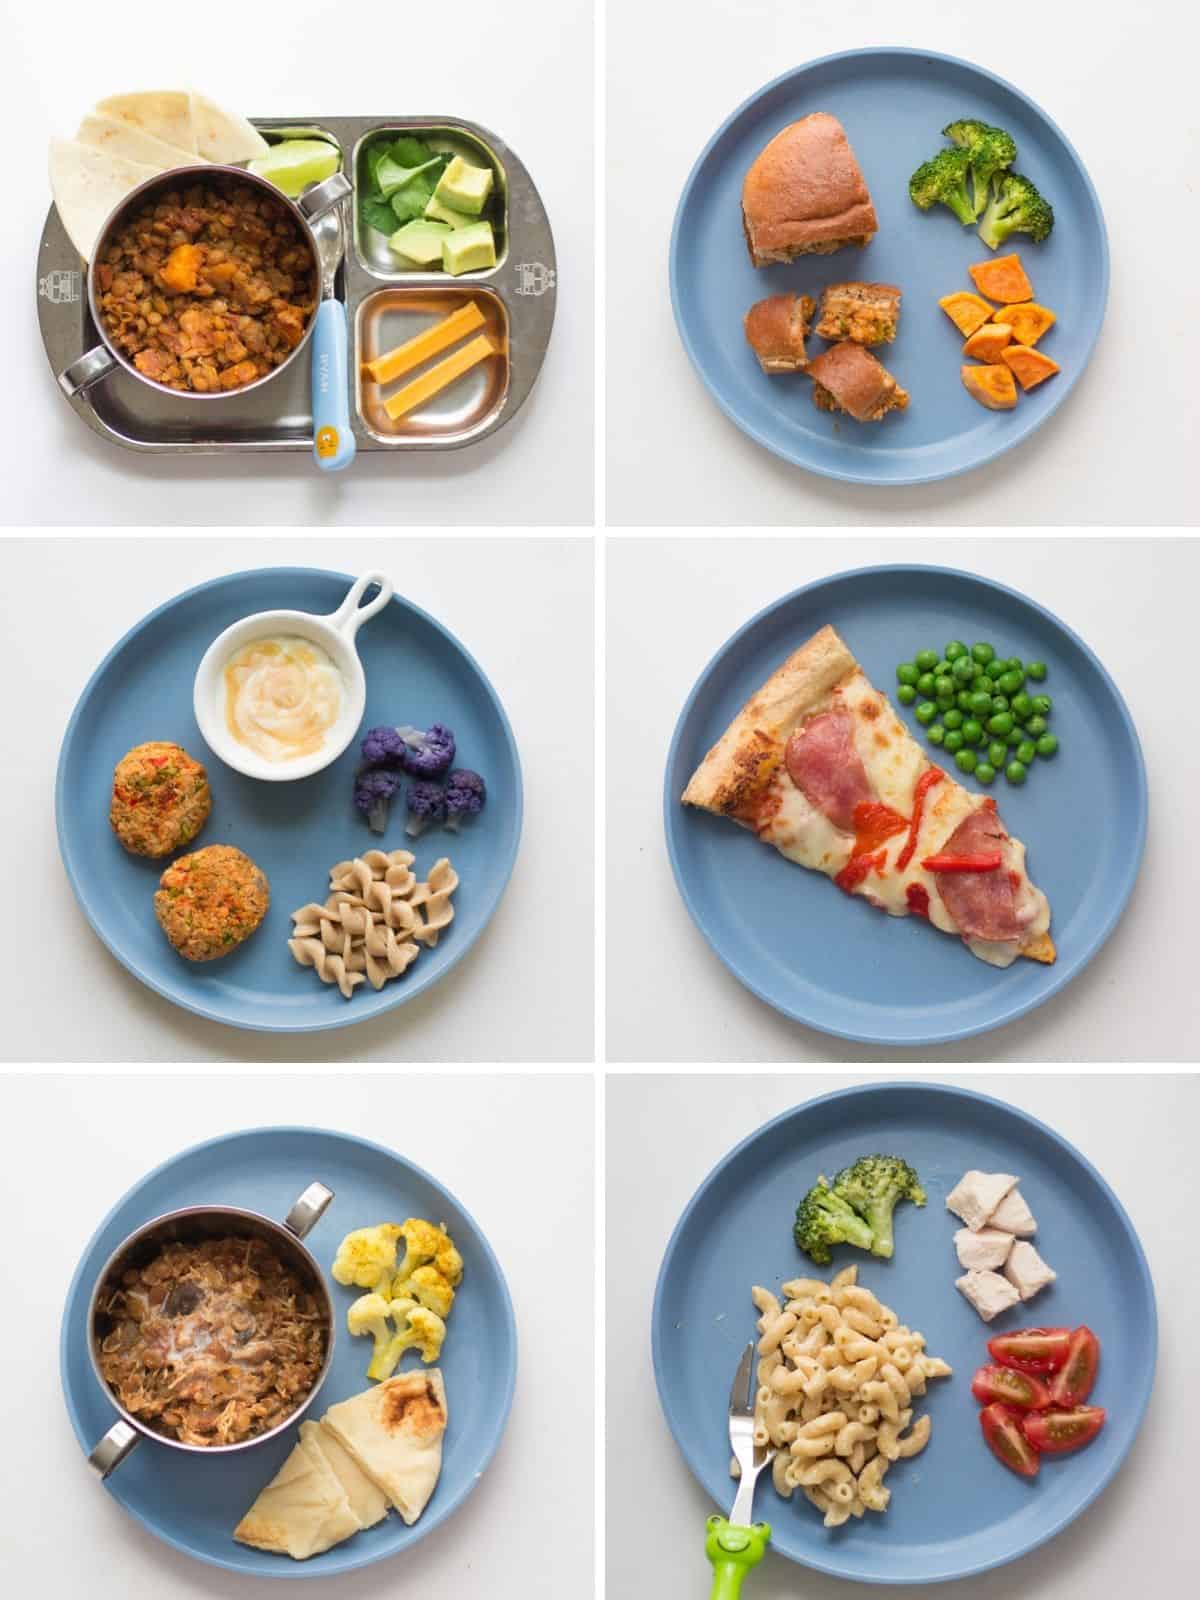 50+ Easy and Healthy Toddler Meals - MJ and Hungryman